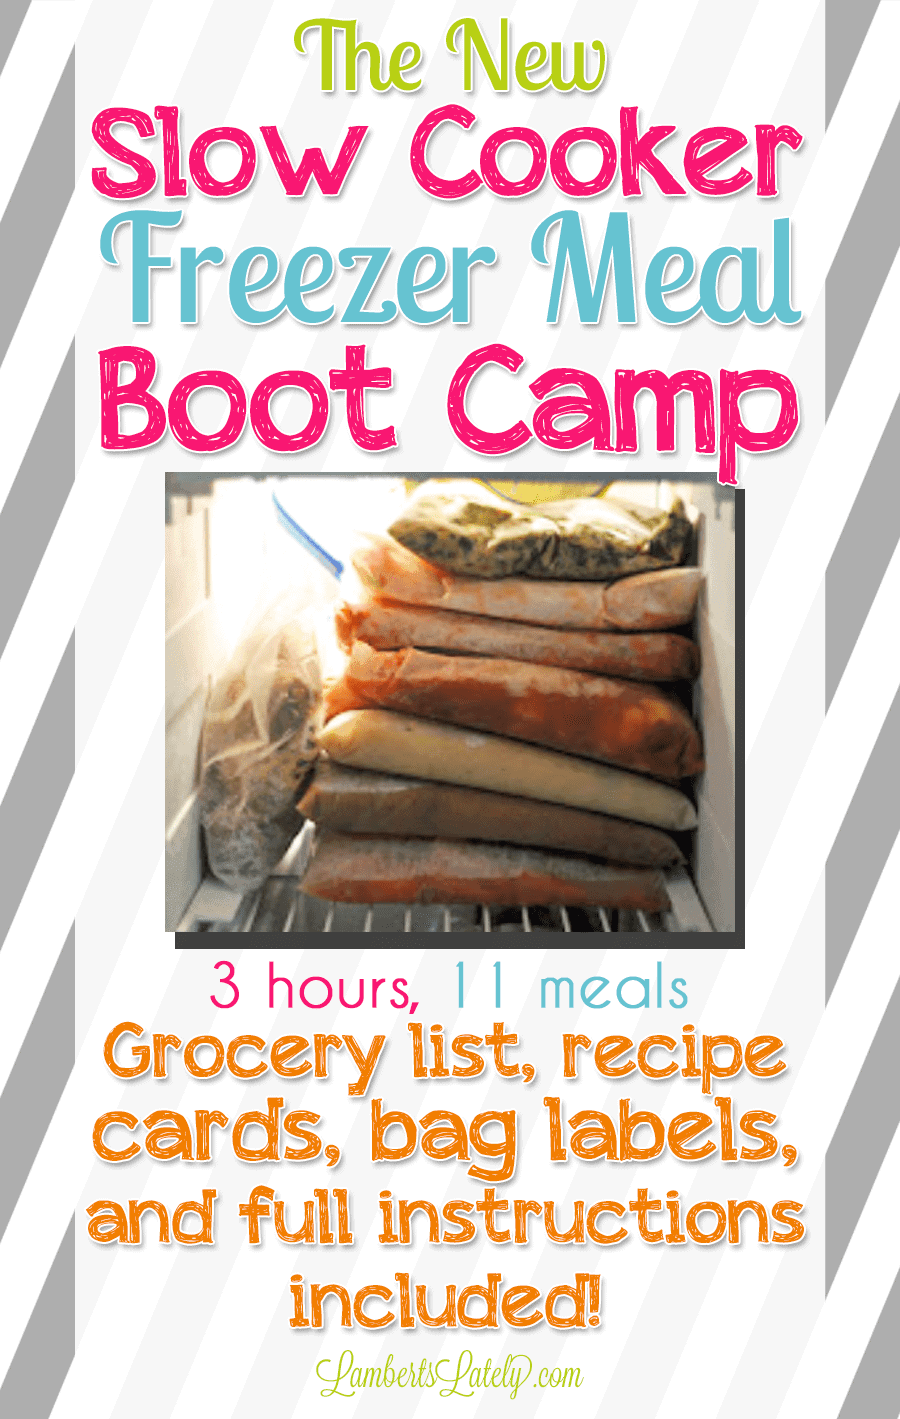 The New Slow Cooker Freezer Meal Boot Camp